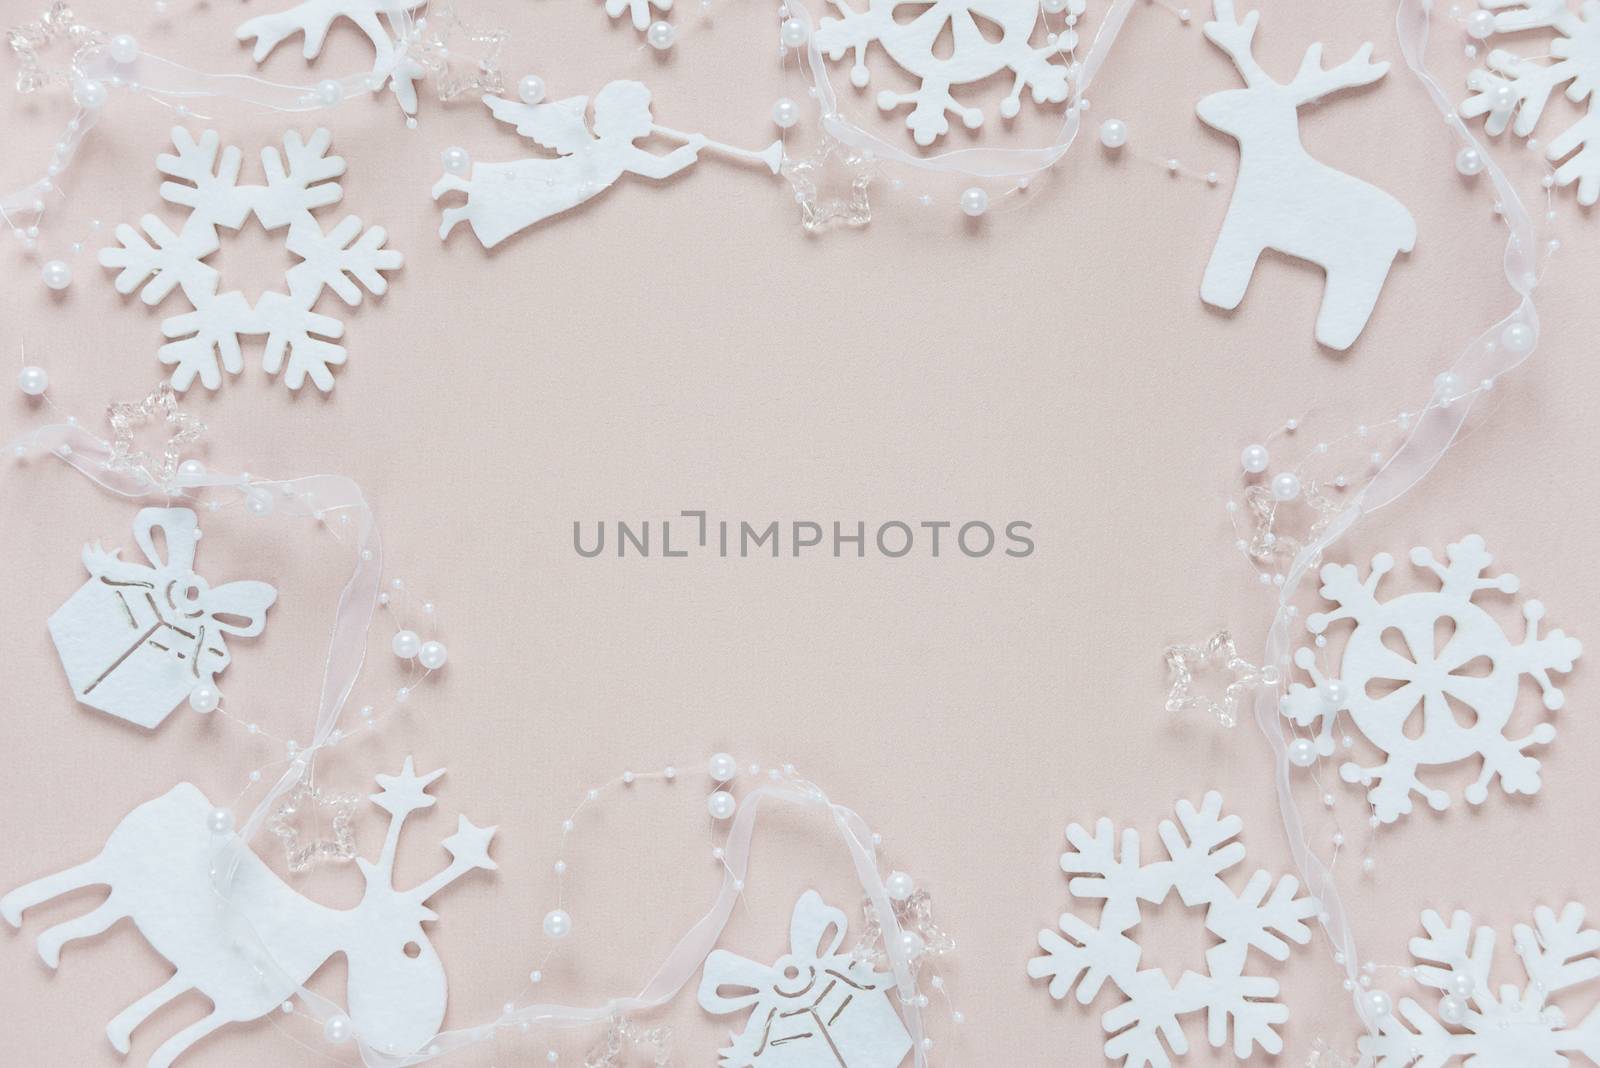 Christmas frame composed of white christmas decoration: snowflakes, deers, flying angel and gift boxes on pink background. Flat lay composition for websites, social media, business owners, magazines,  bloggers, artists etc.